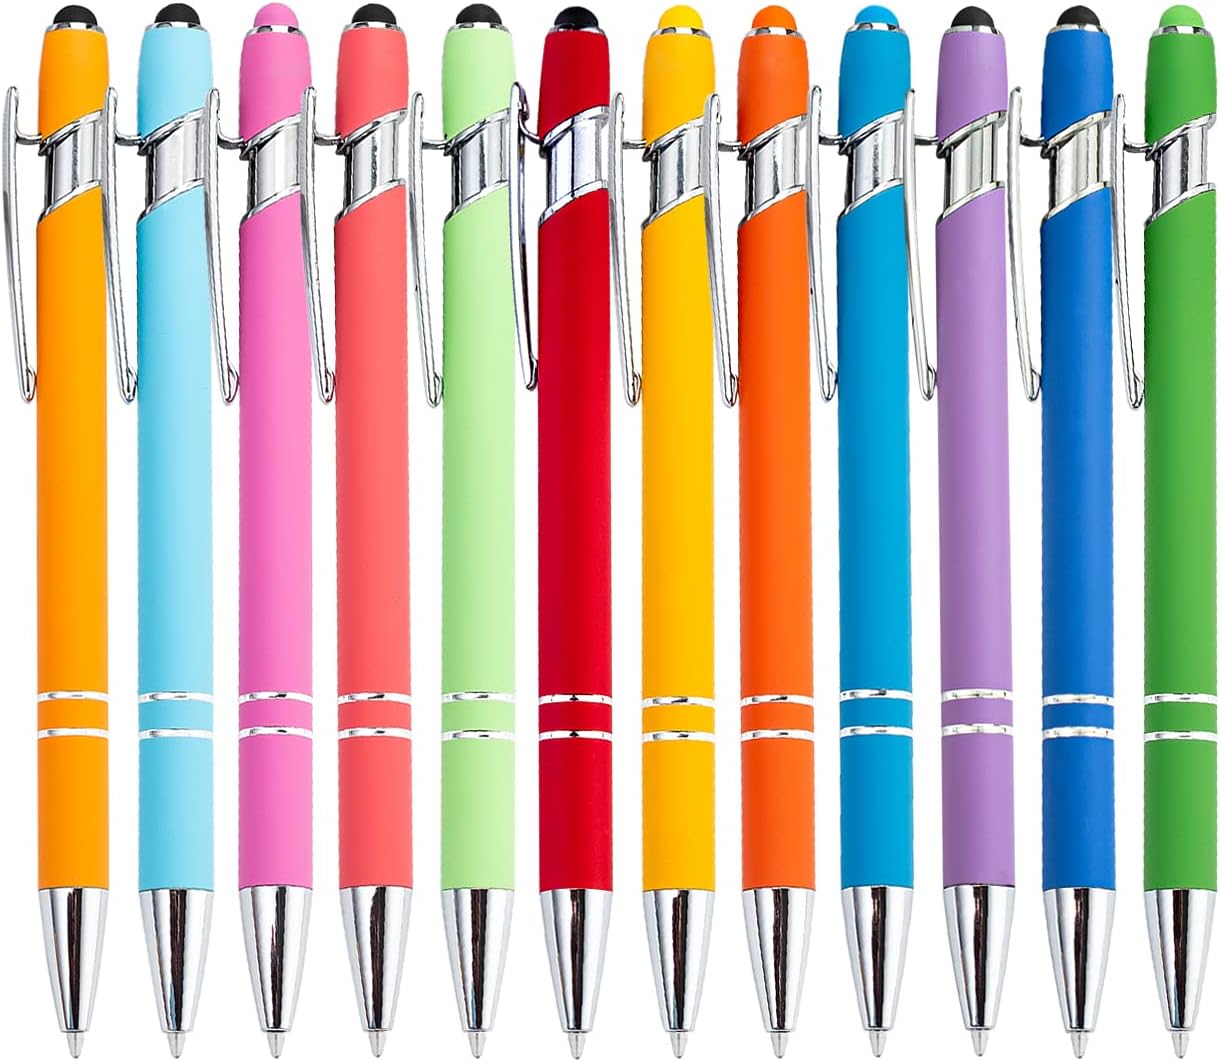 12 Pack Rainbow Rubberized Soft Touch Ballpoint Pen with Stylus Tip - TTpen